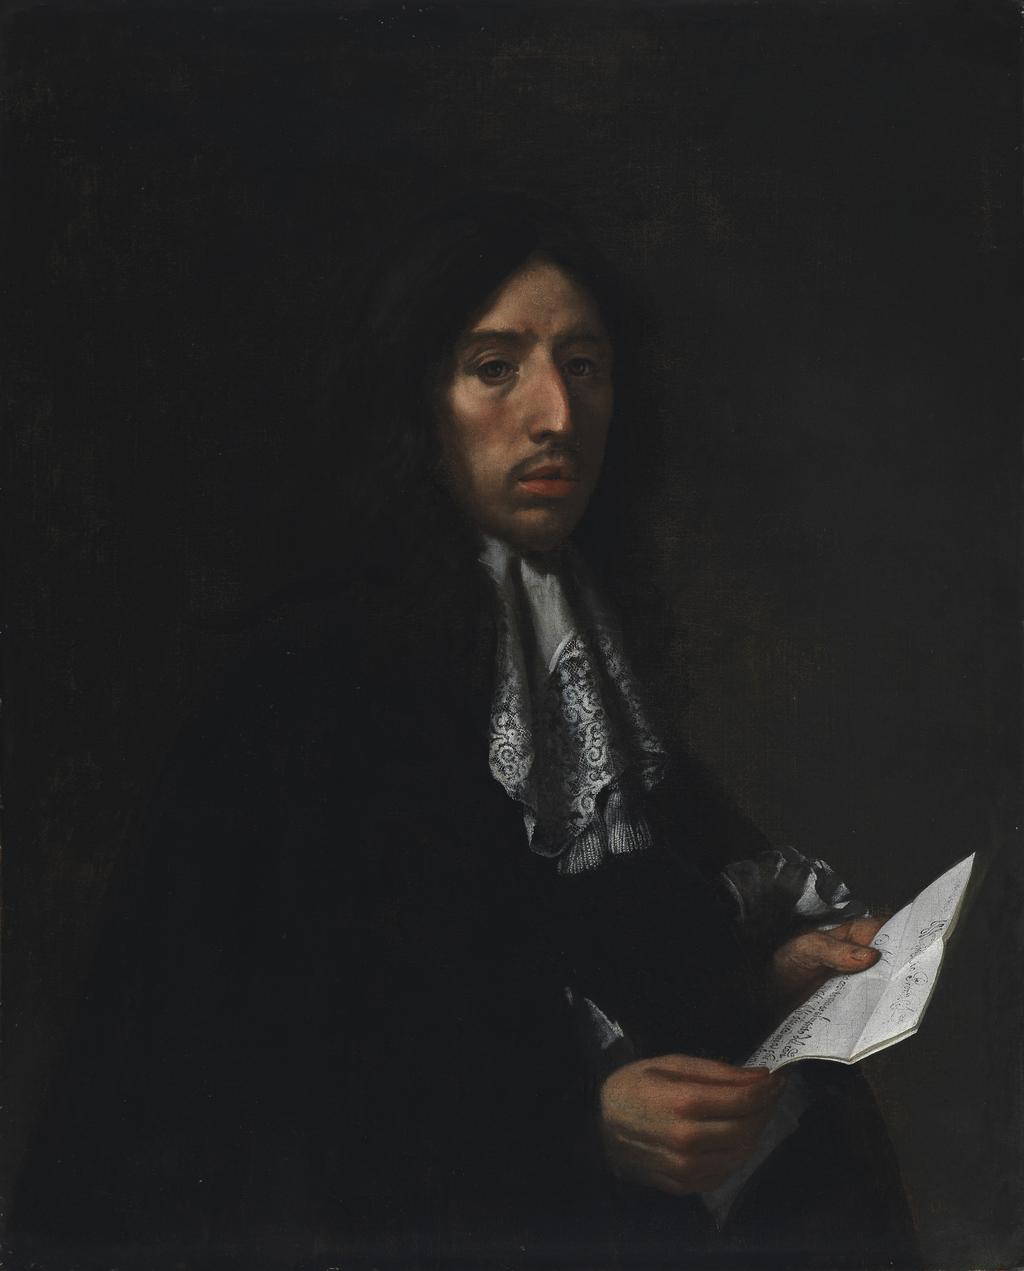 An image of Sir John Finch F.R.S., F.R.C.P. 1626-1682. Dolci, Carlo (Italian, 1616-1686). Oil on canvas, height 87.2 cm, width 70.8 cm, 1665-1670. Production Note: One of a pair of portraits. Painted in Florence during Finch's residency as Minister to the Grand Duke of Tuscany.